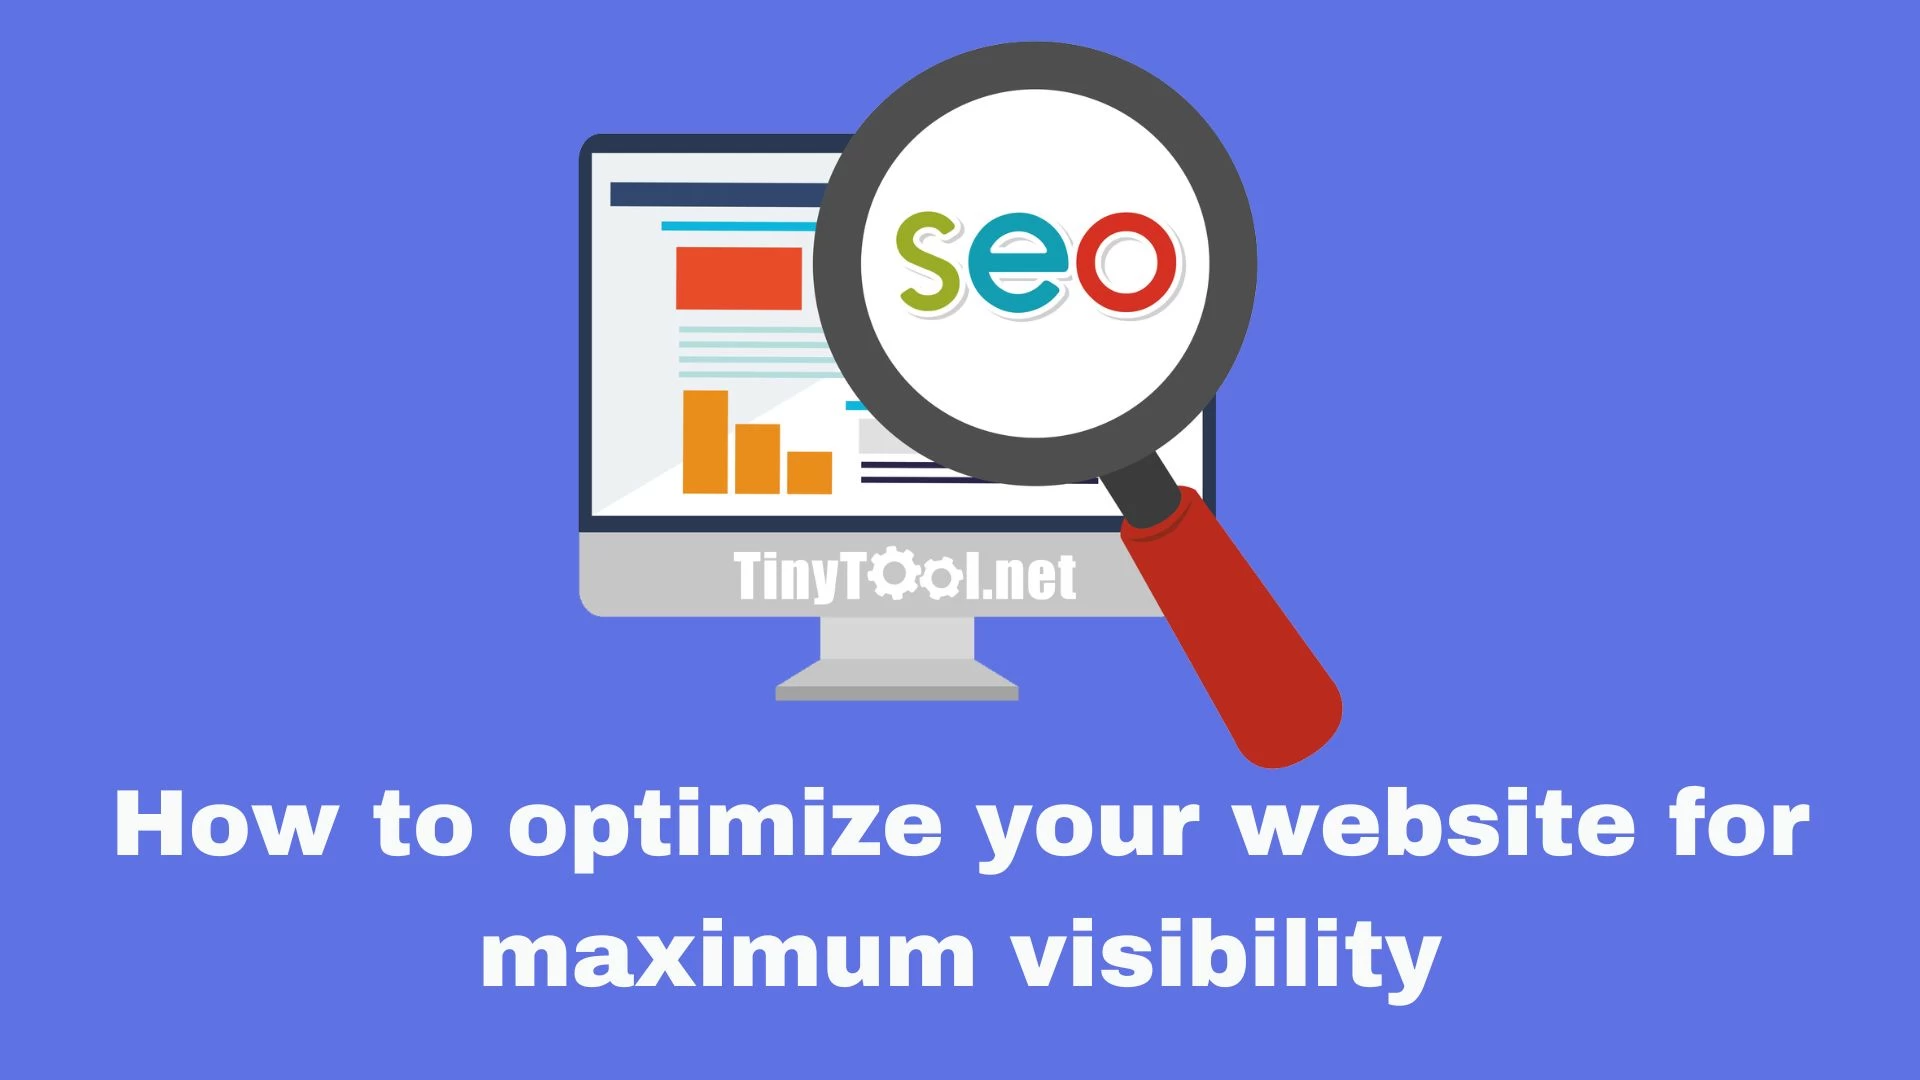 How to optimize your website for maximum visibility